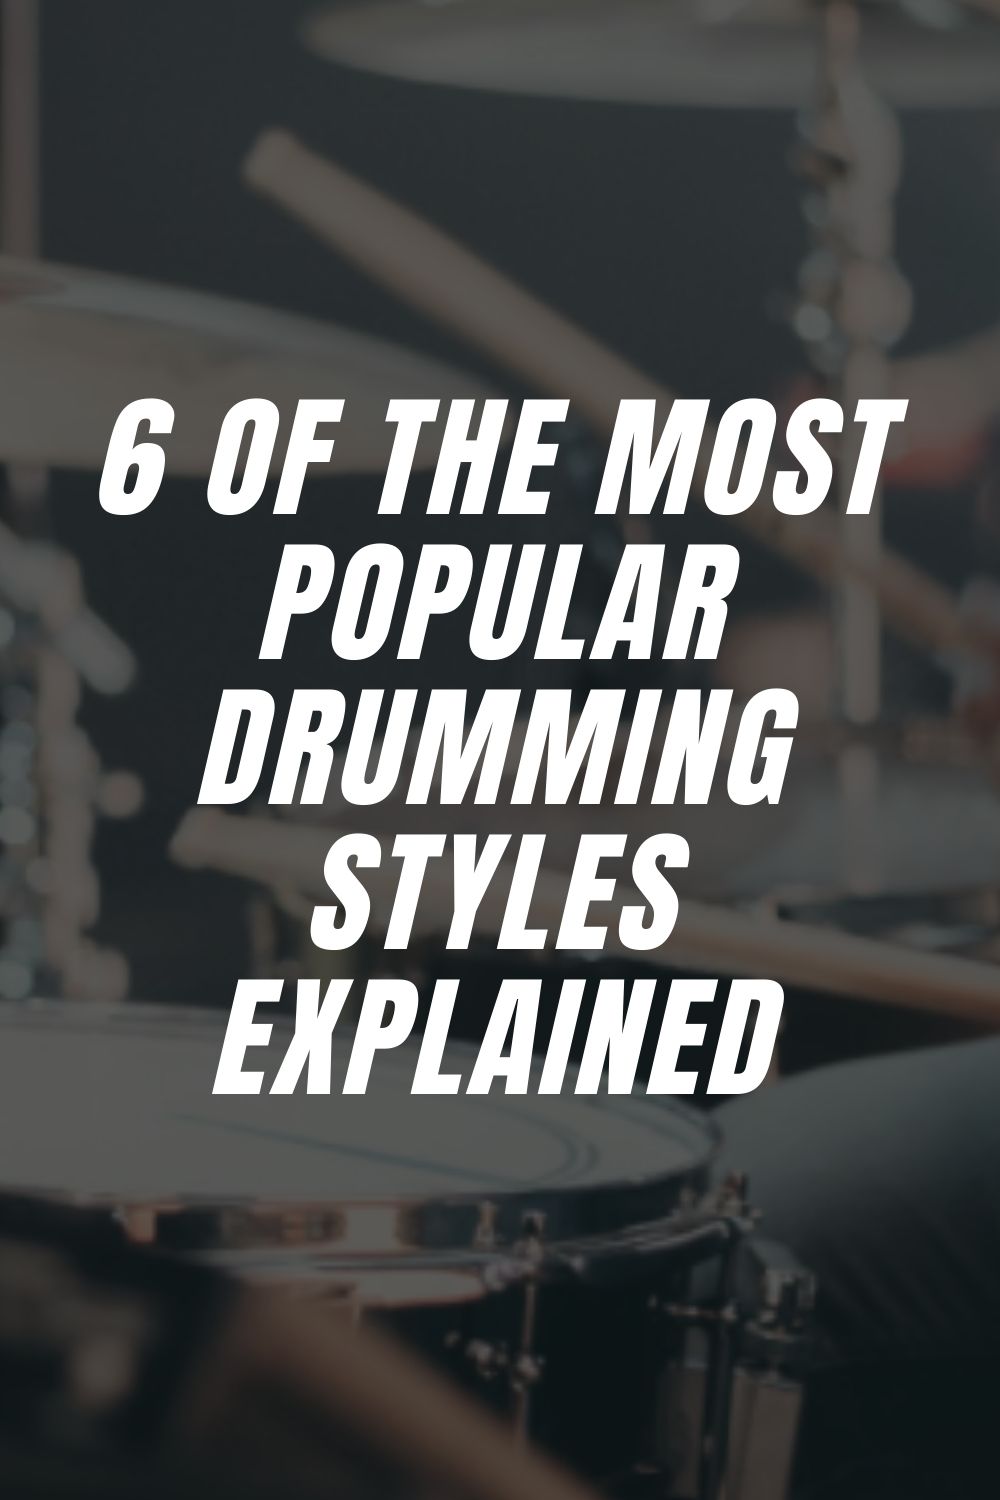 Drumming Styles Explained